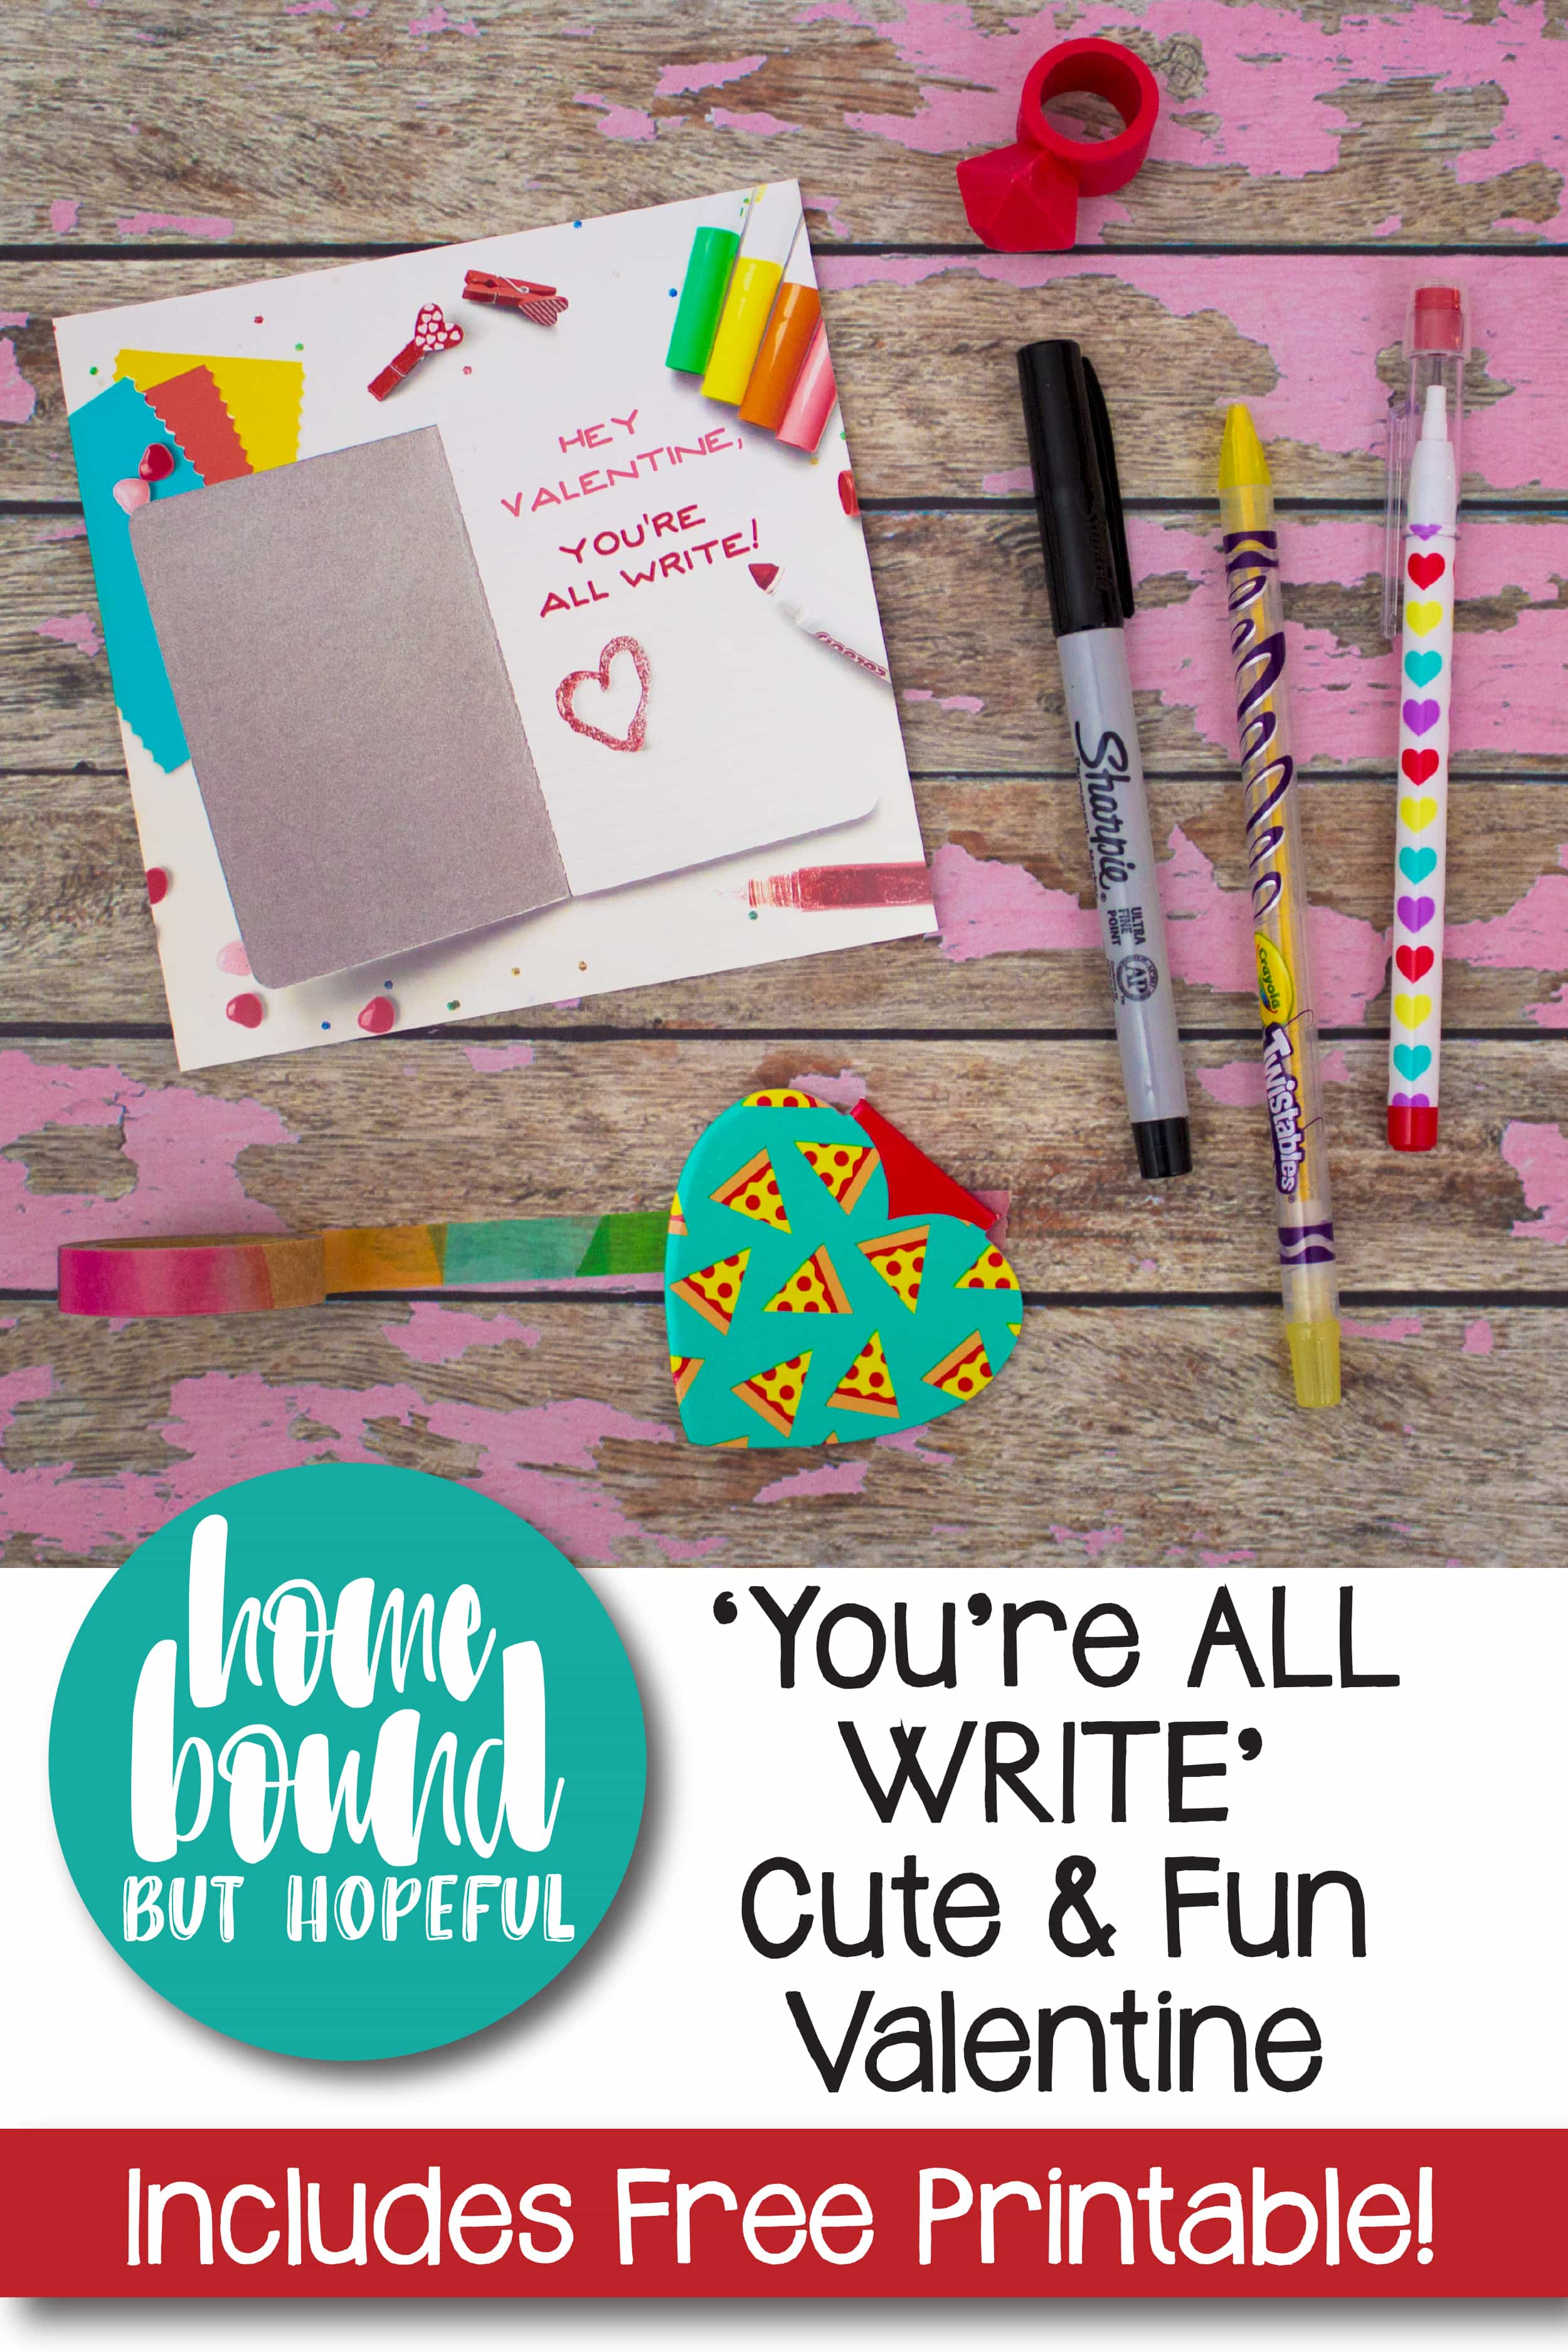 If you want to let your Valentine know they're 'all write', here's the perfect way to do it! Our adorable free printable Valentine is great for encouraging young kids to write!